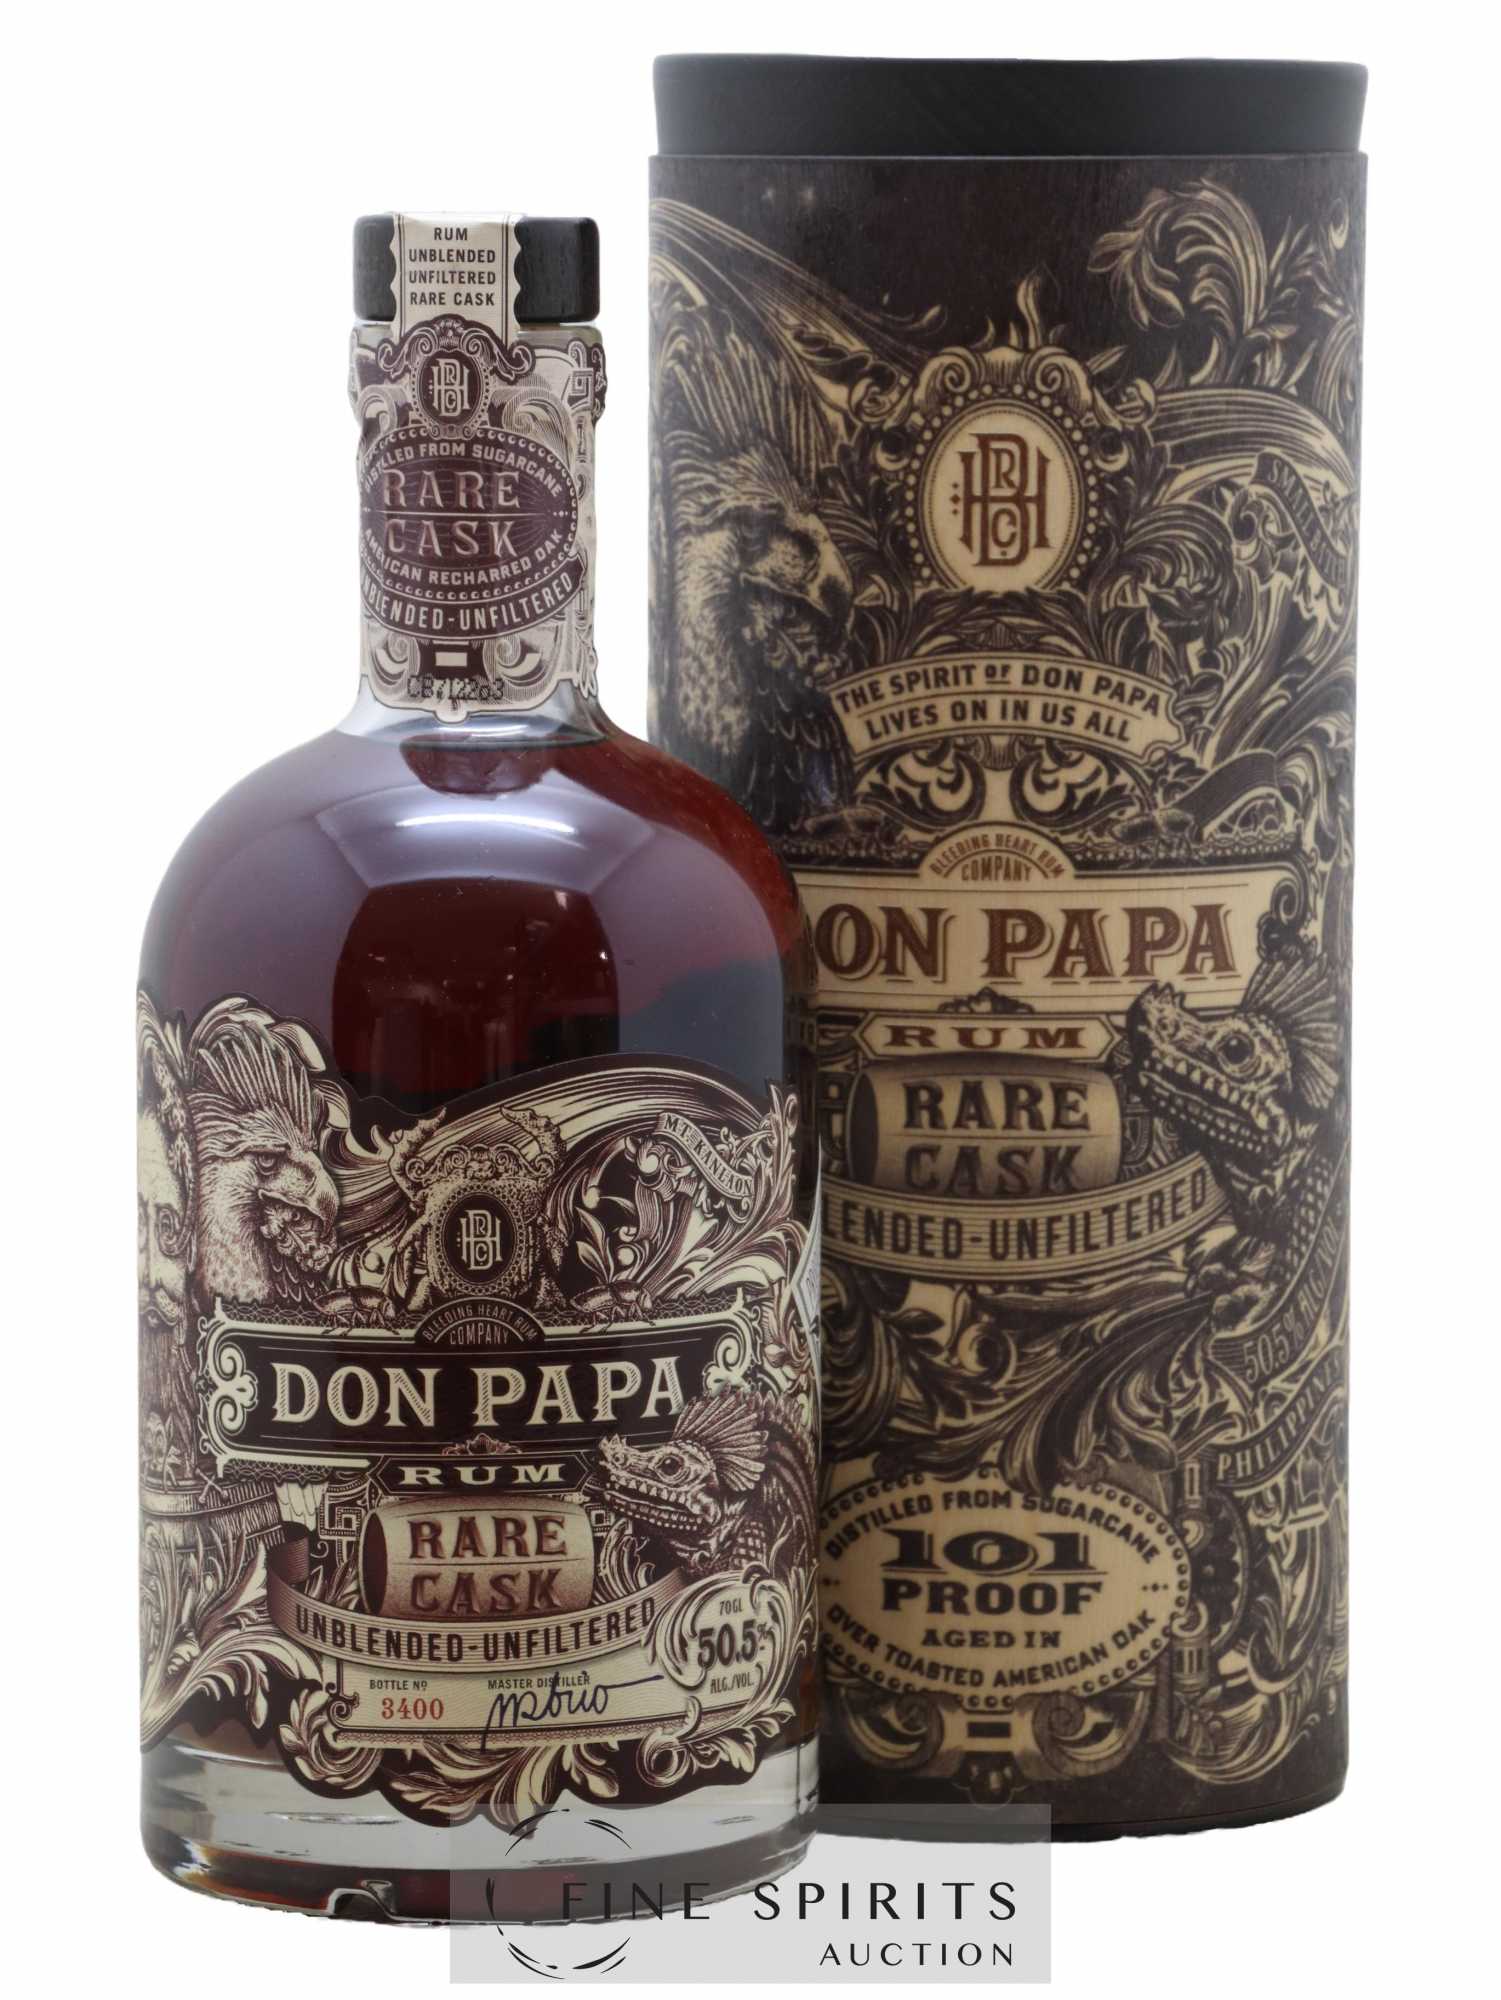 Don Papa Of. Rare Cask Unblended Unfilterred 